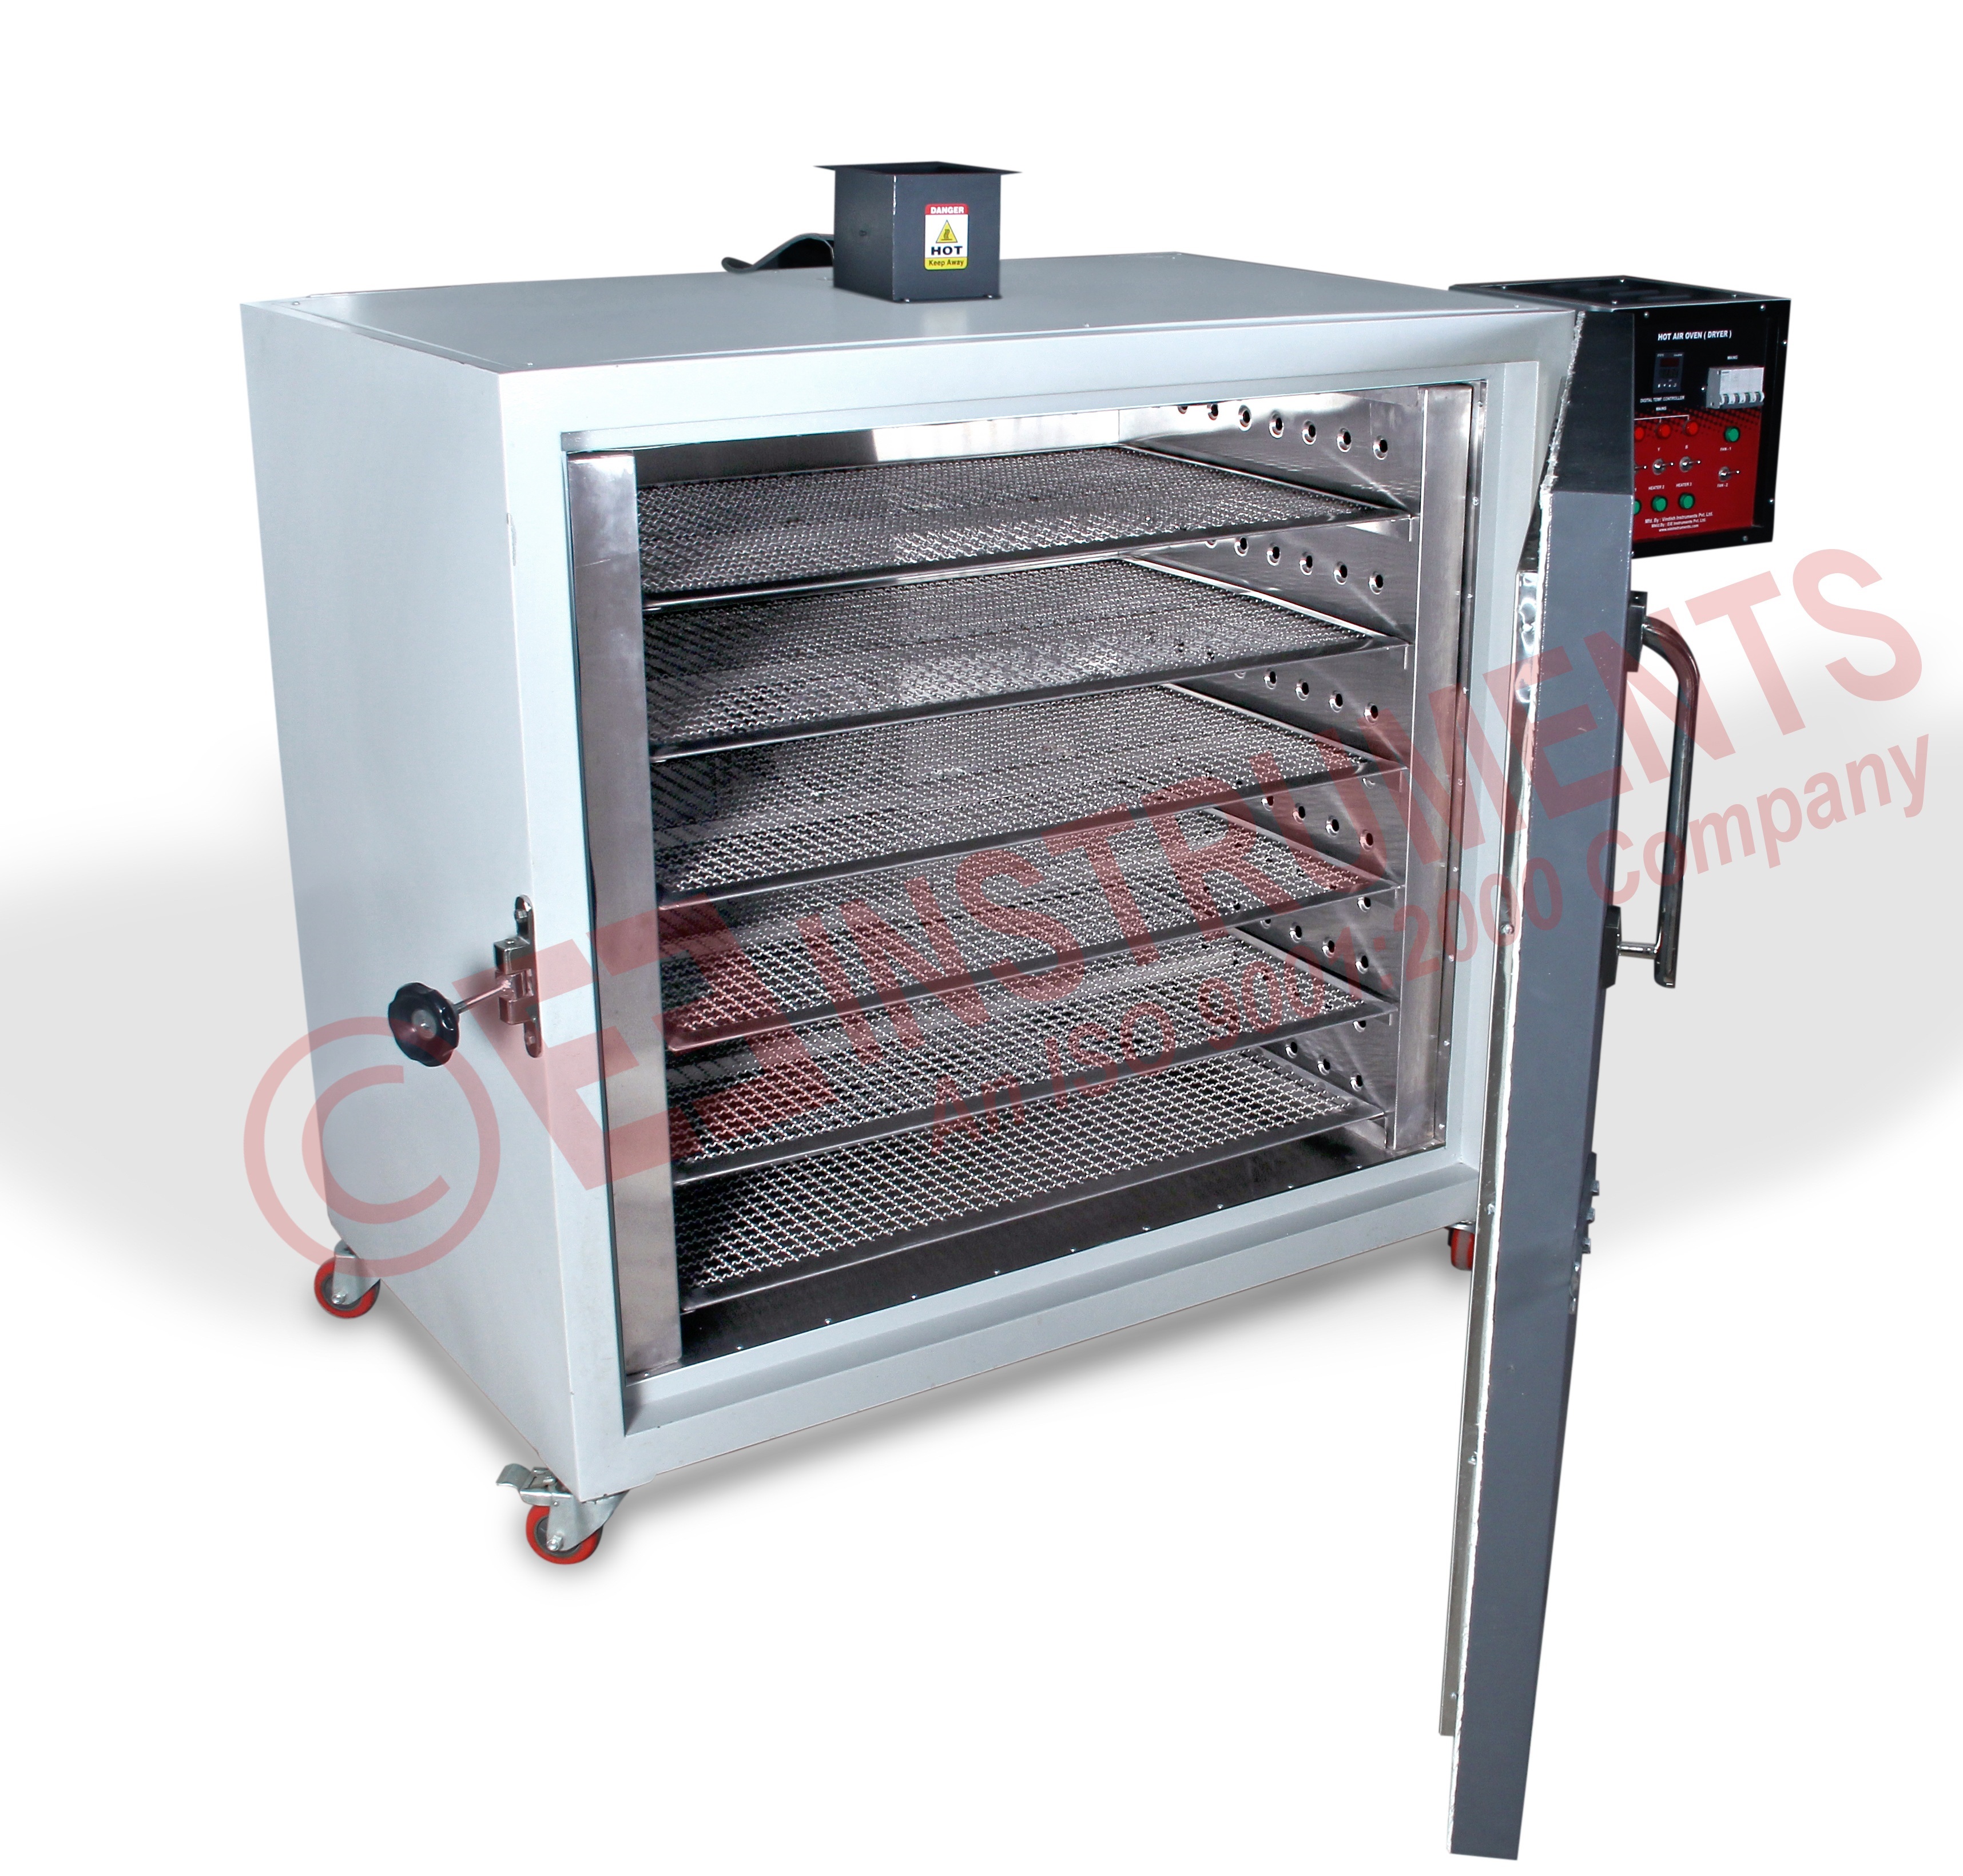 HOT AIR OVEN FOR WEBSITE